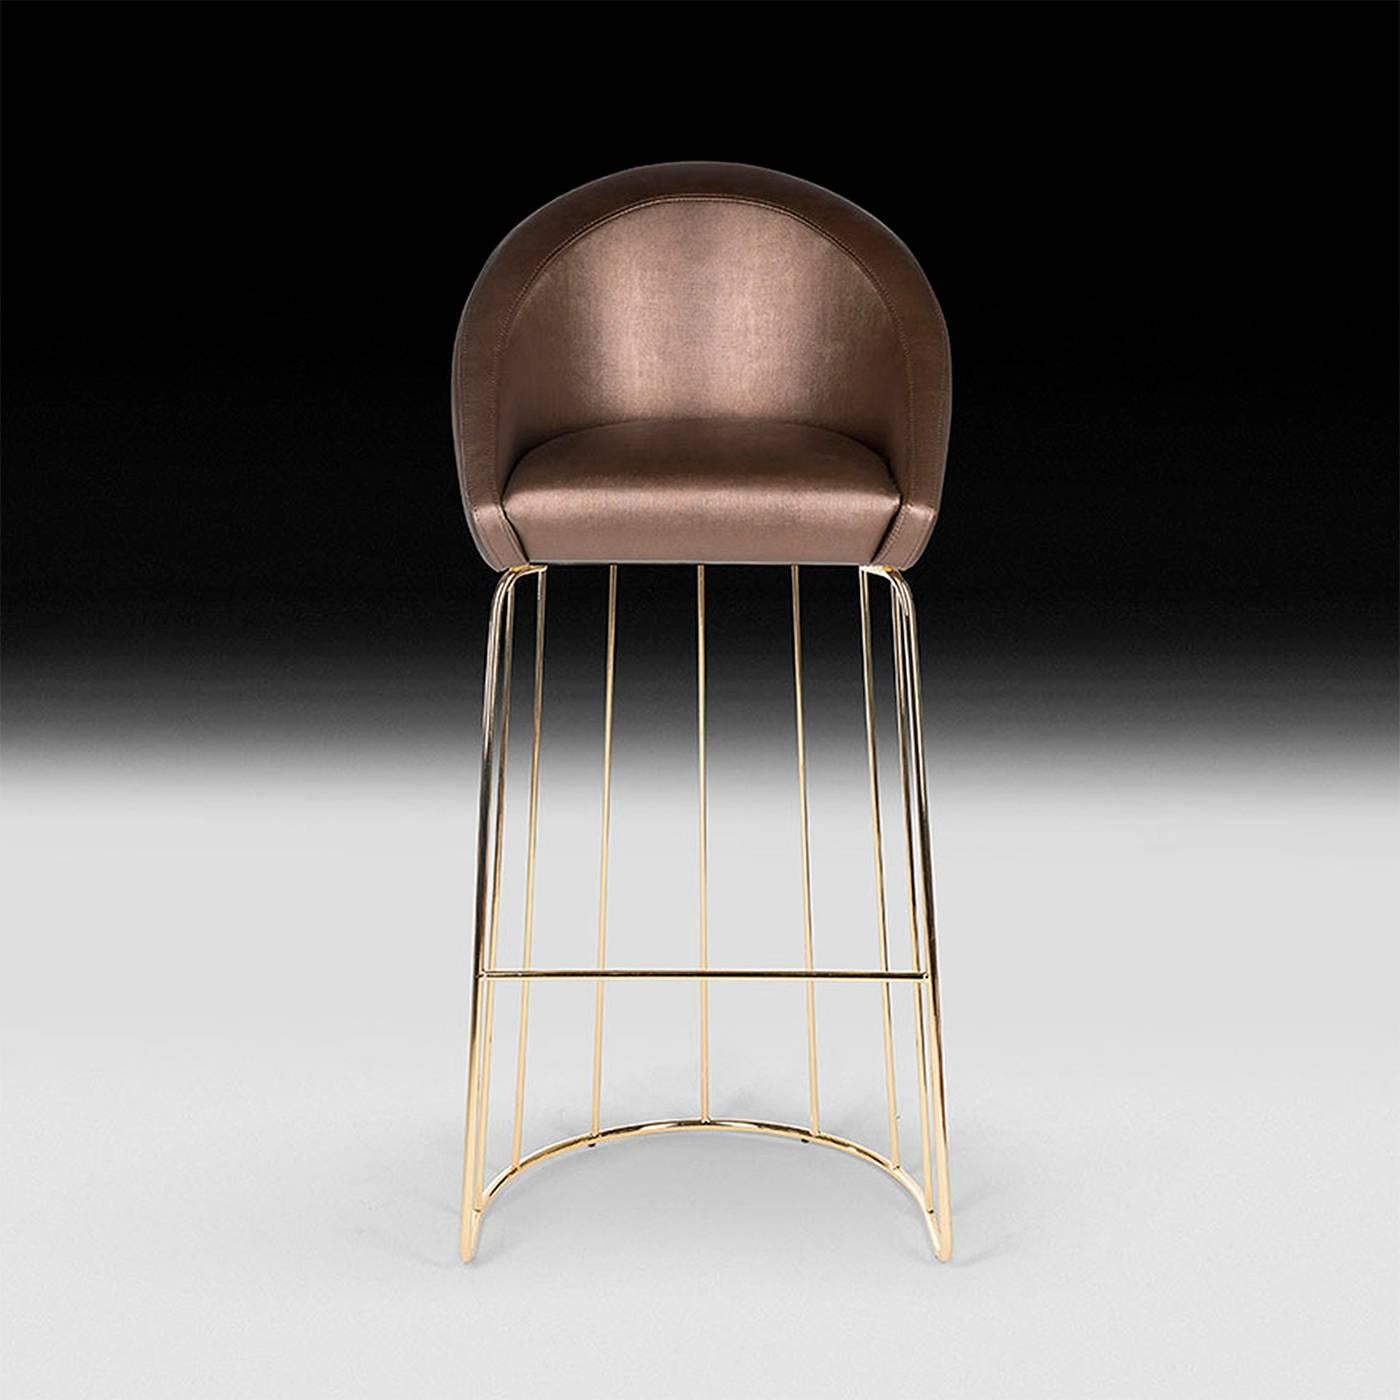 This show-stopping bar stool is a unique complement to any living room and kitchen decor. Its open brass-finished wire cage frame, with an alluring retro flair, supports a gracefully curved seat in Raina Col. Bronze (CAT. A) fabric that can be